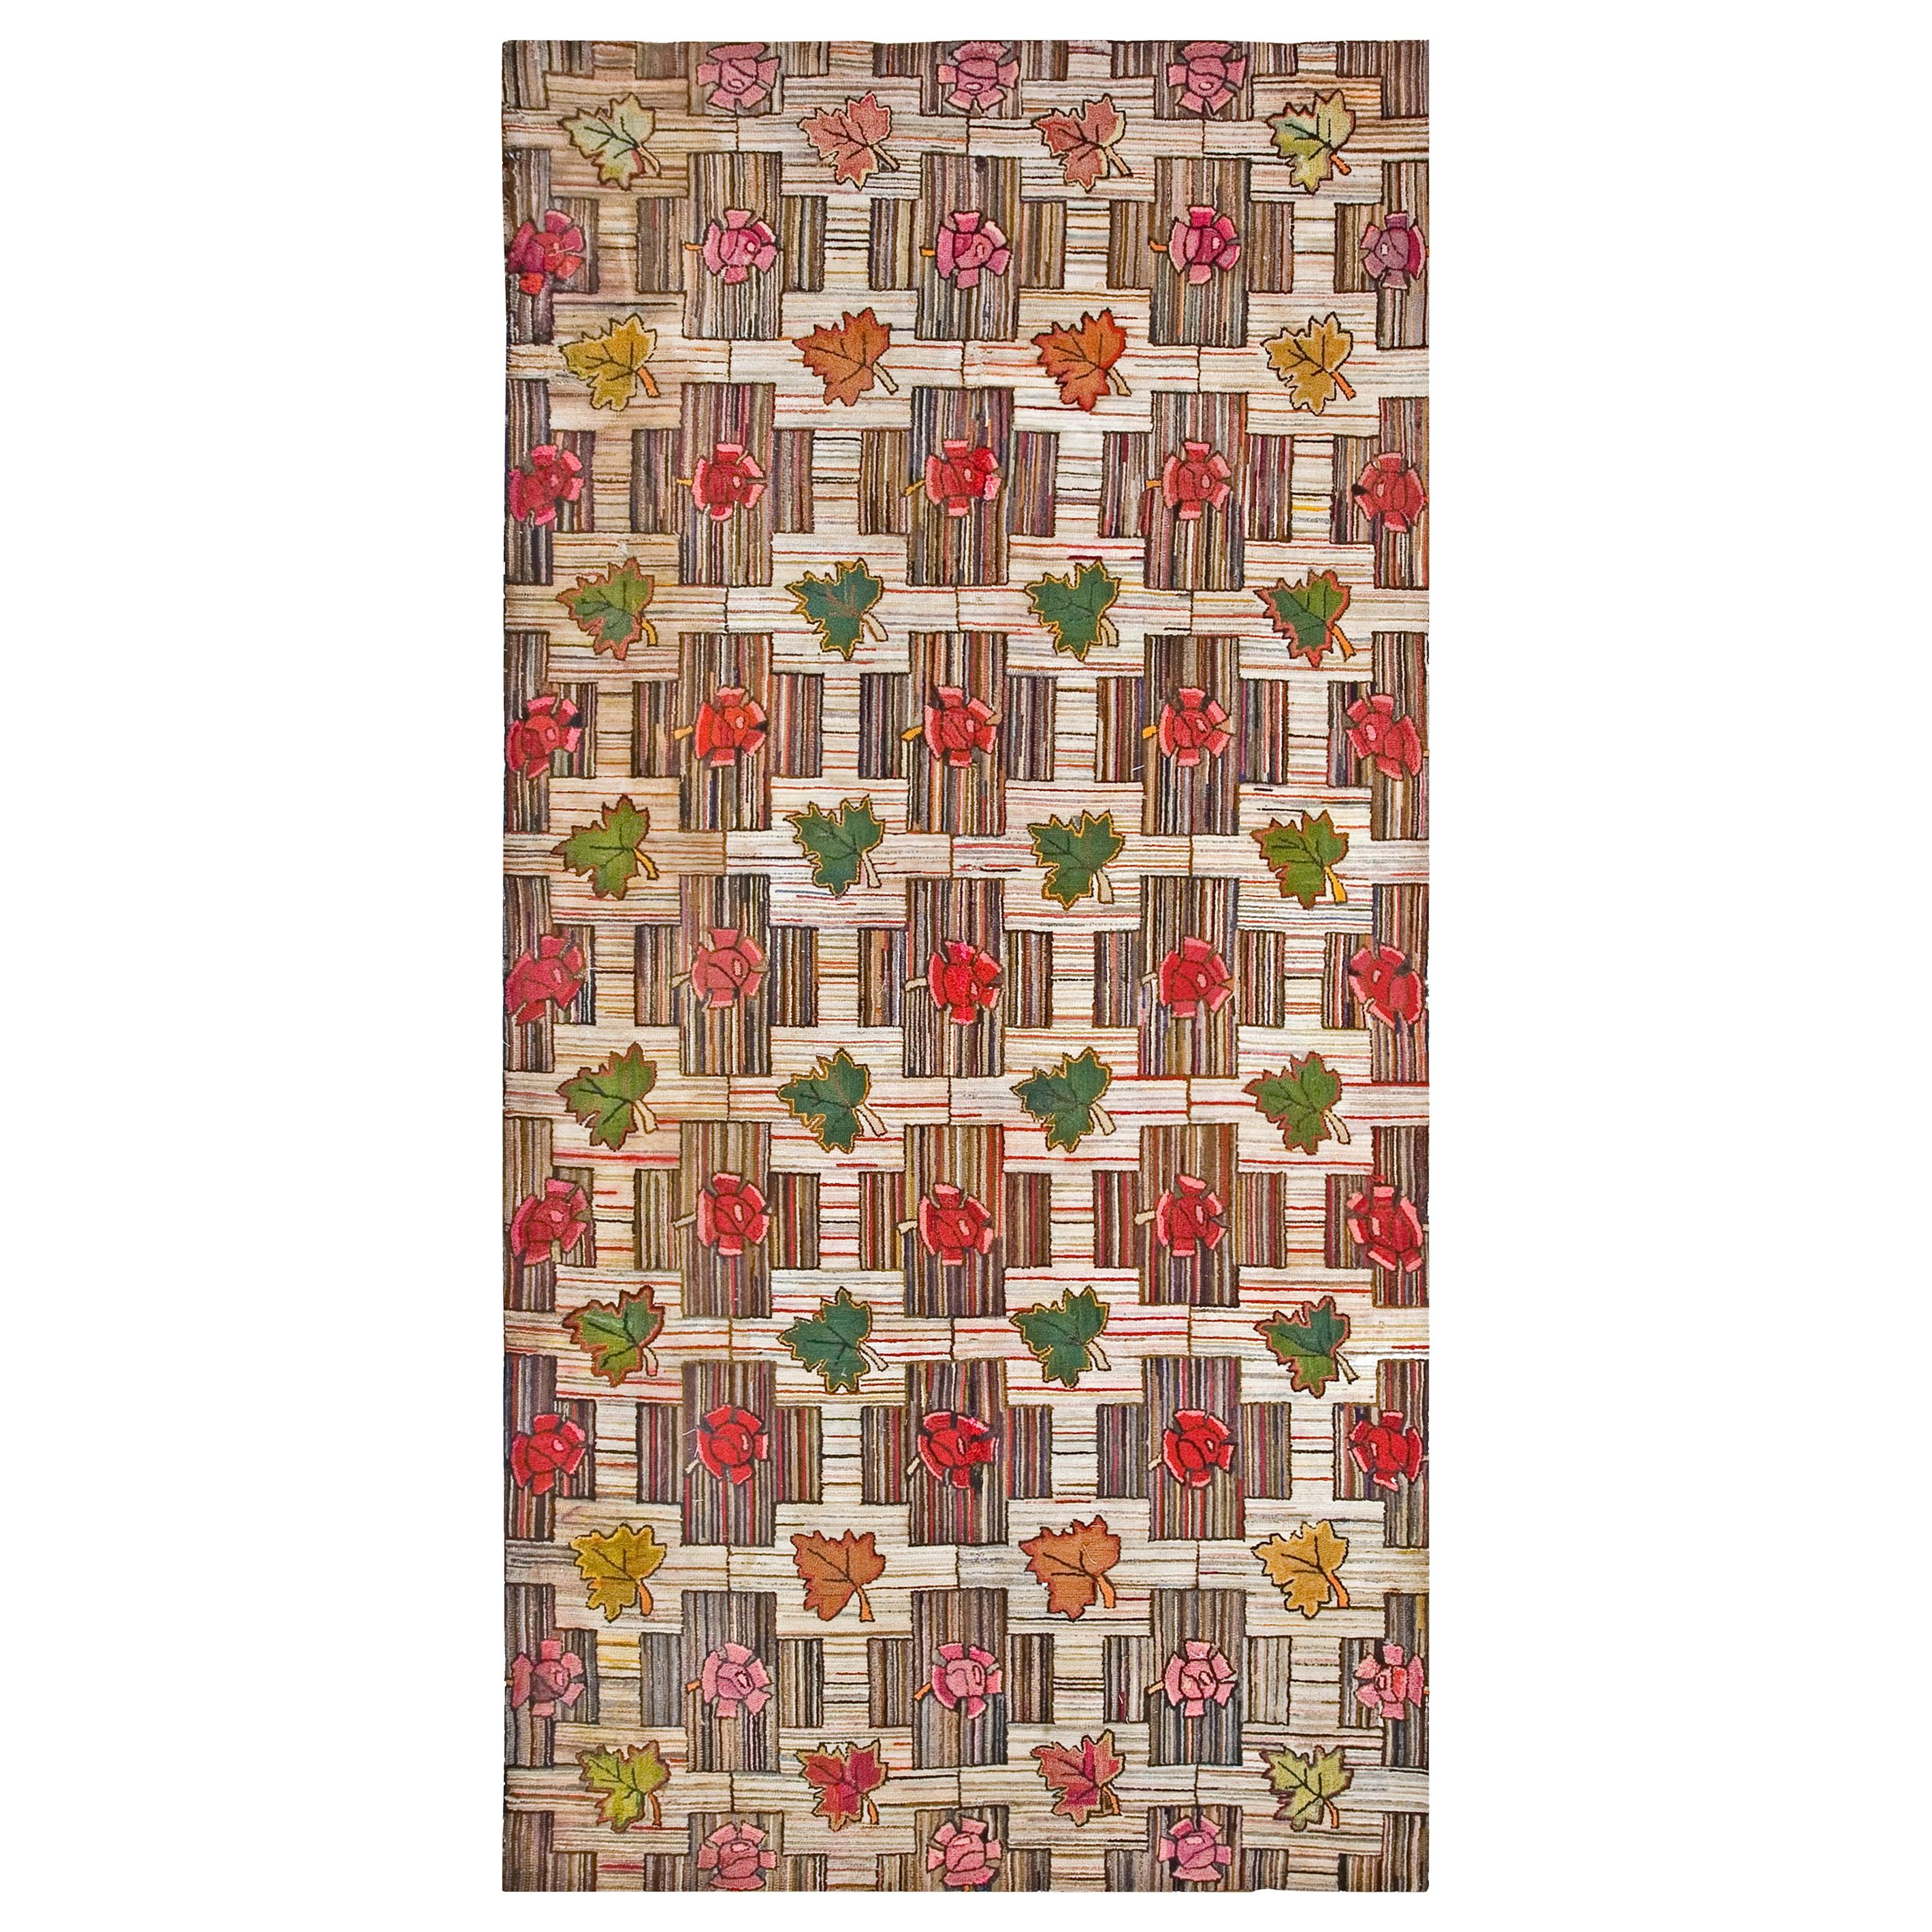 Early 20th Century American Hooked Rug ( 5'10" x 11'10" - 178 x 360 ) For Sale